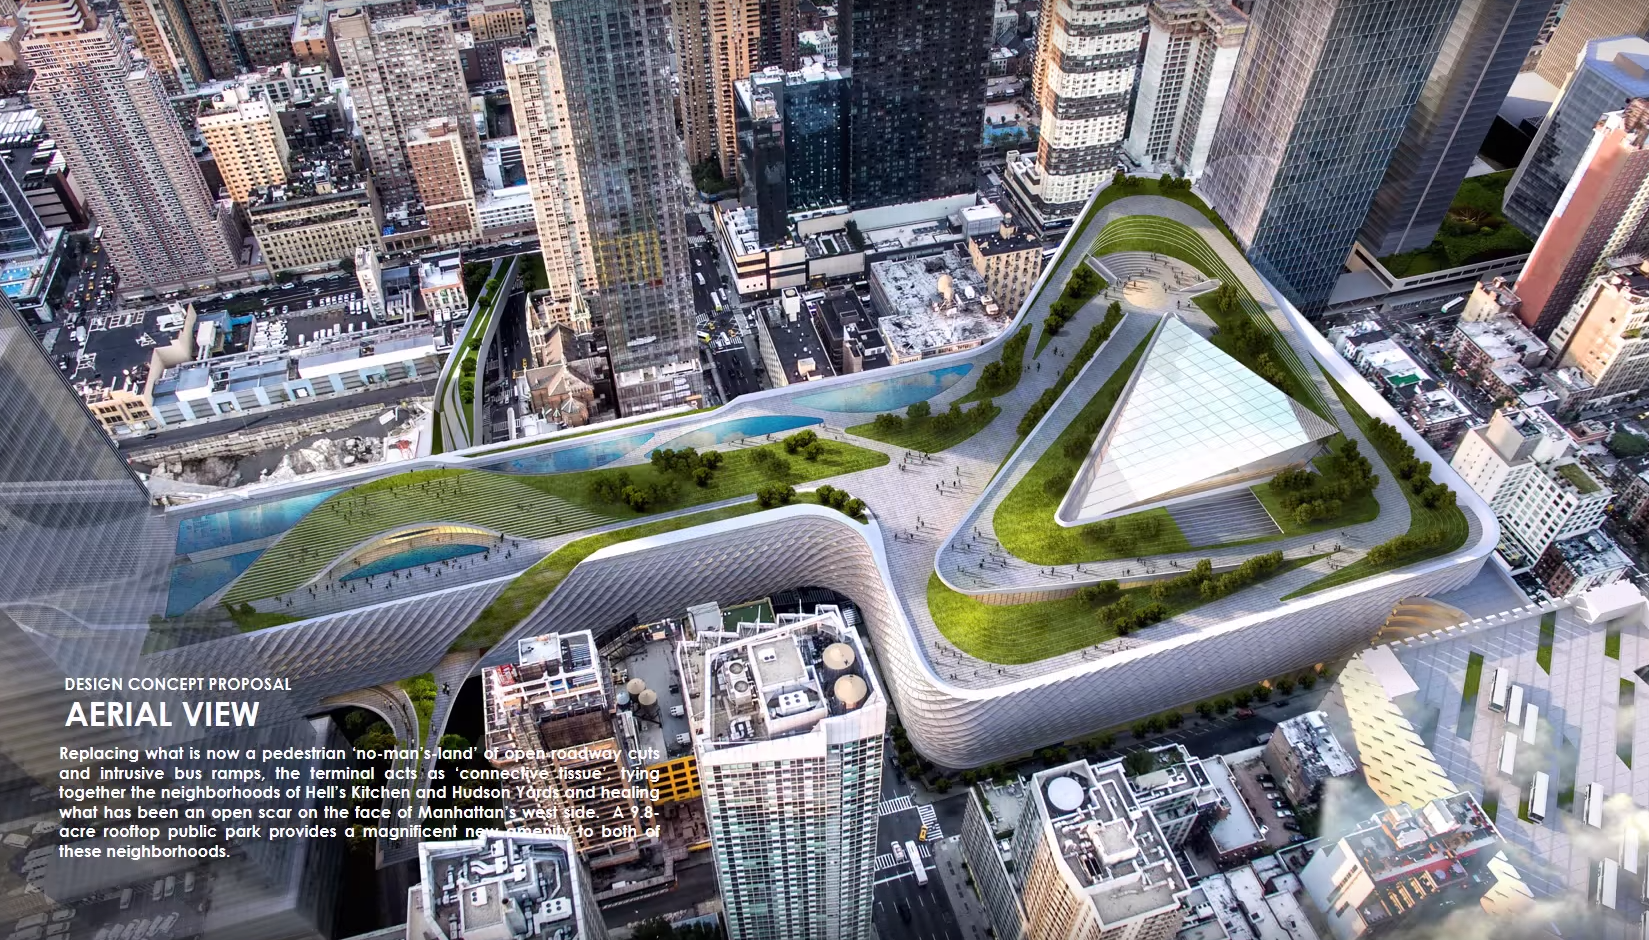 BREAKING: Designs for new Port Authority bus terminal revealed